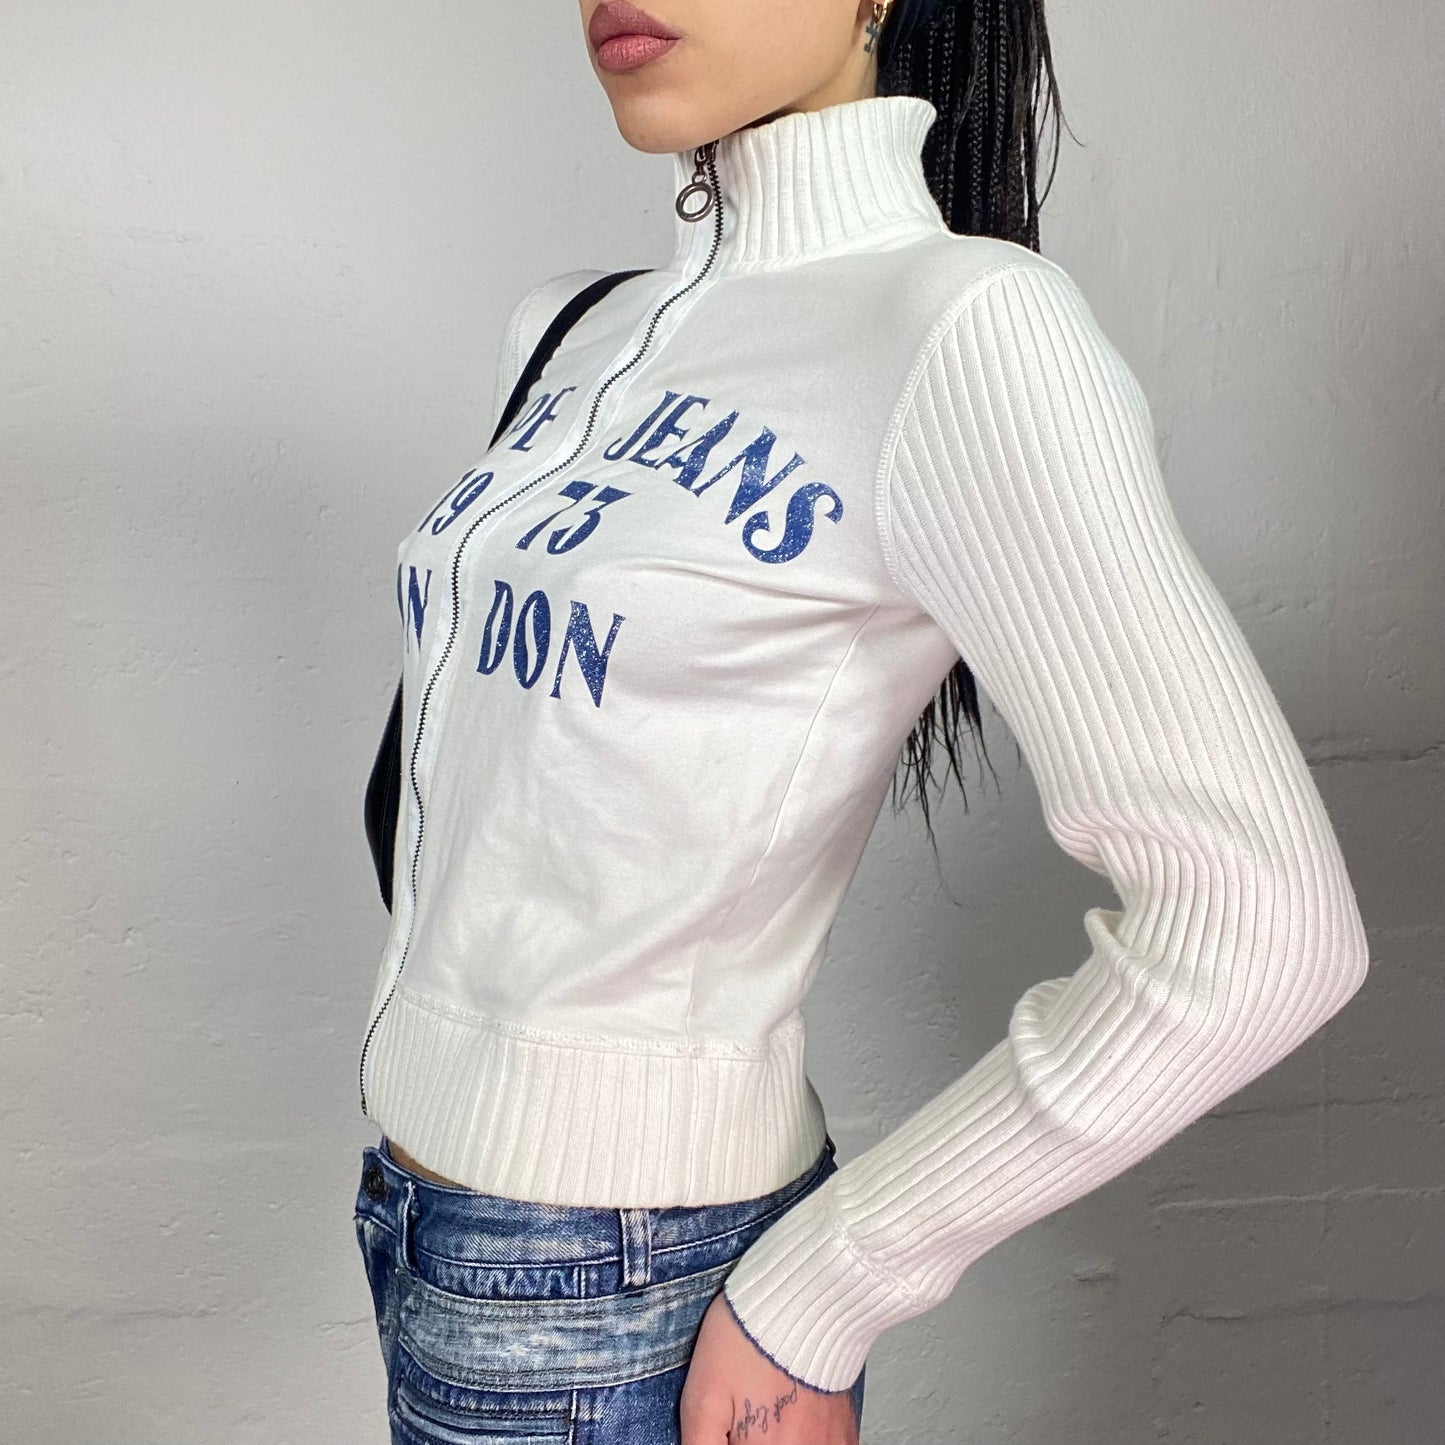 Vintage 2000's Pepe Jeans Sporty White Zip Up Sweater with Blue Brand "London 73" Print (S)